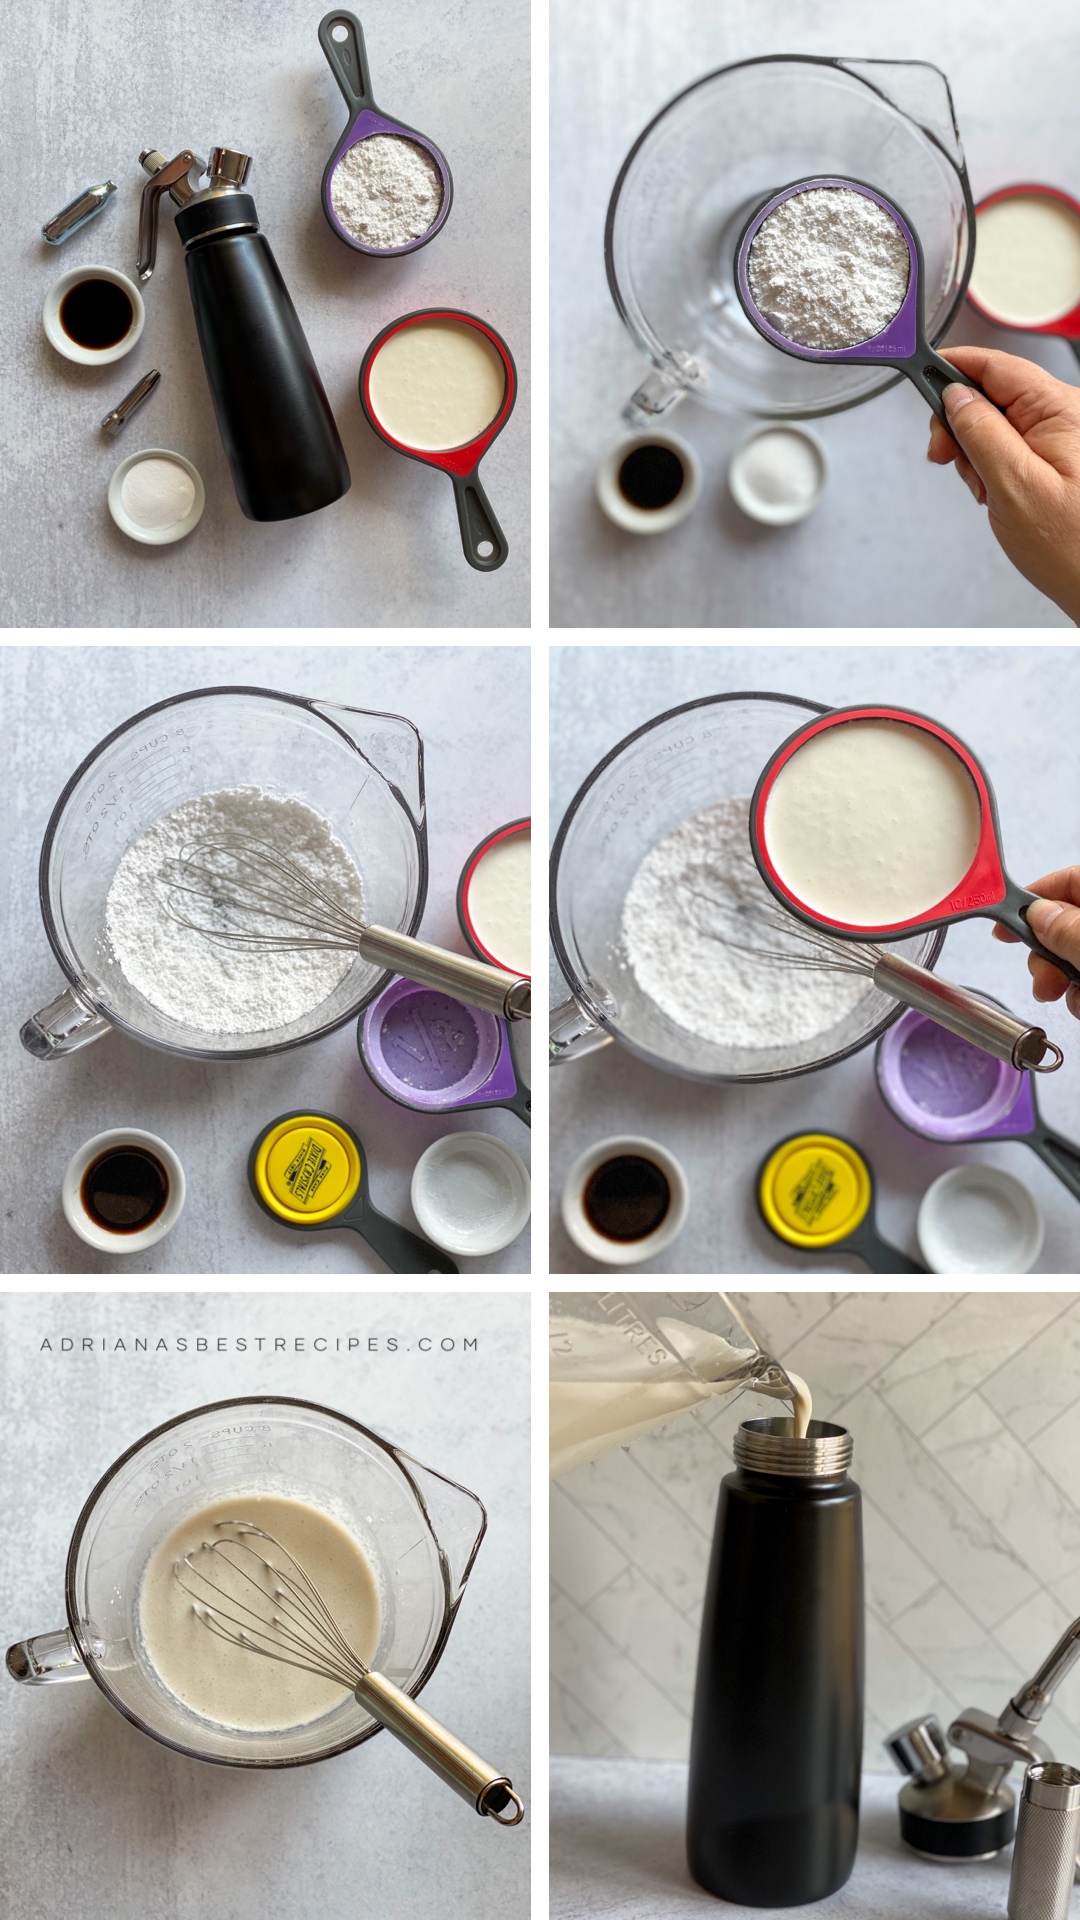 Step by step on making homemade whipped cream on a dispenser